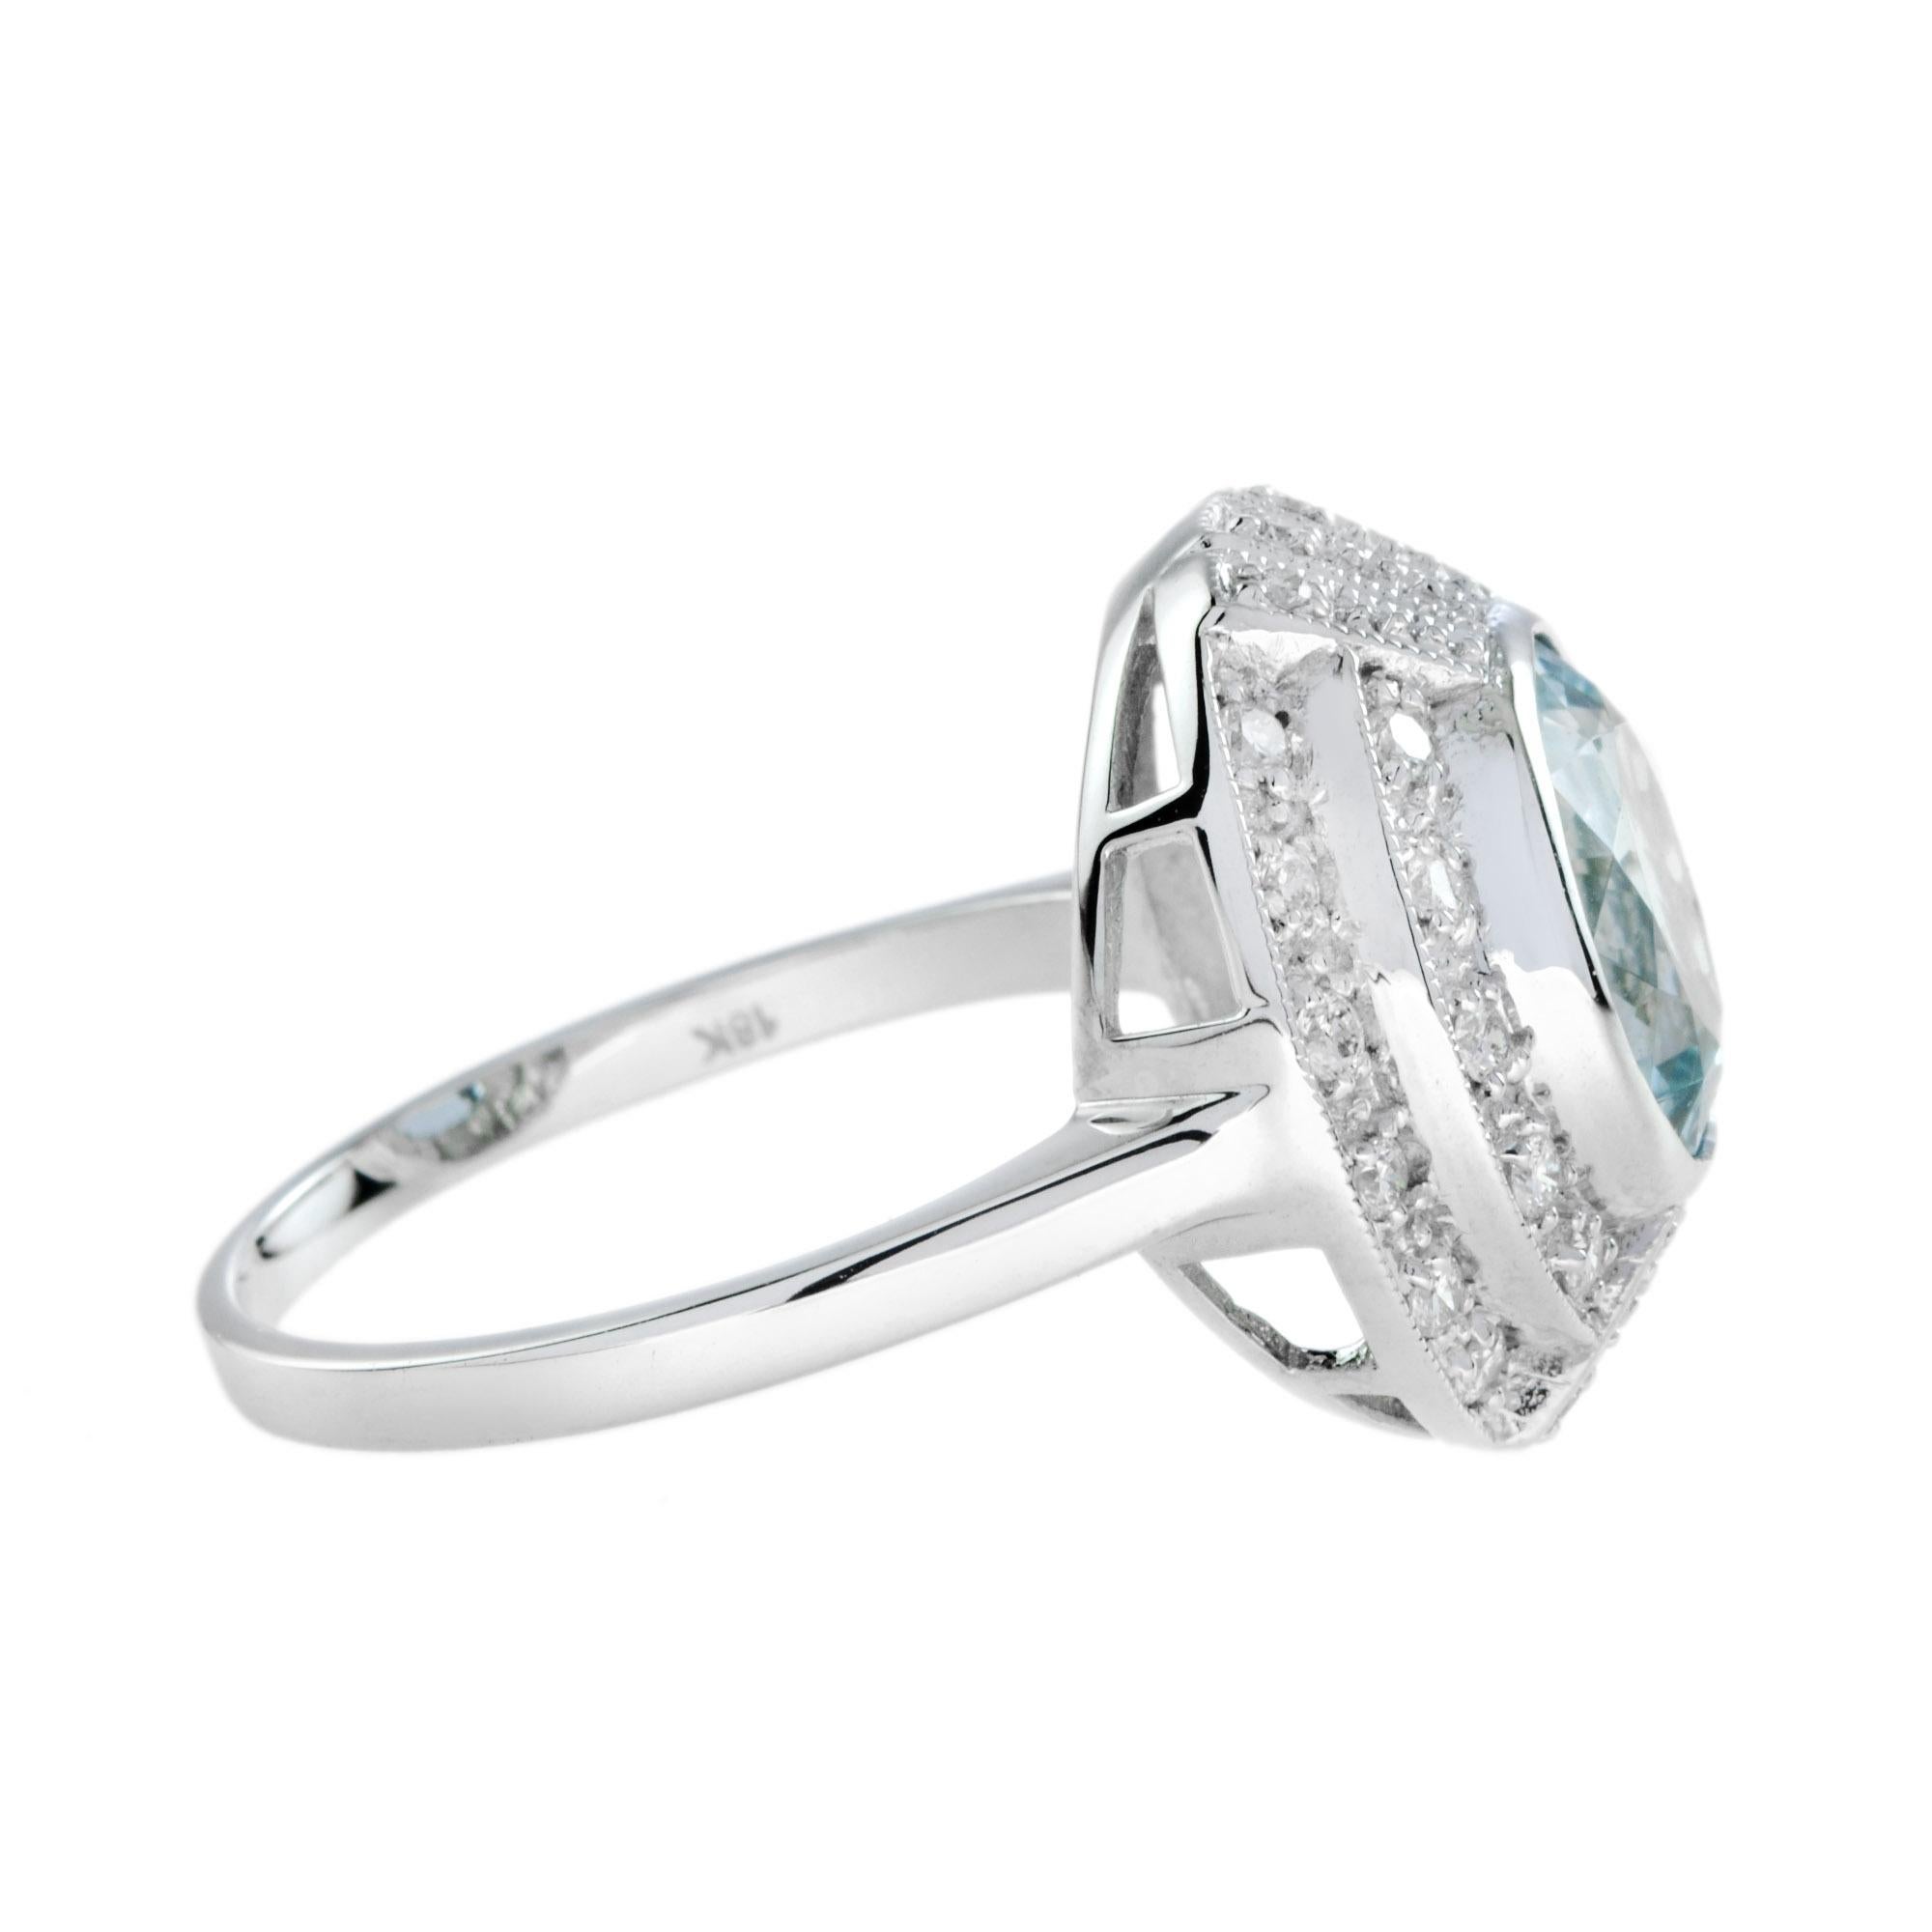 For Sale:  Extraordinary 2.2 Carats Aquamarine and Diamond Halo Ring in 18K White Gold 3